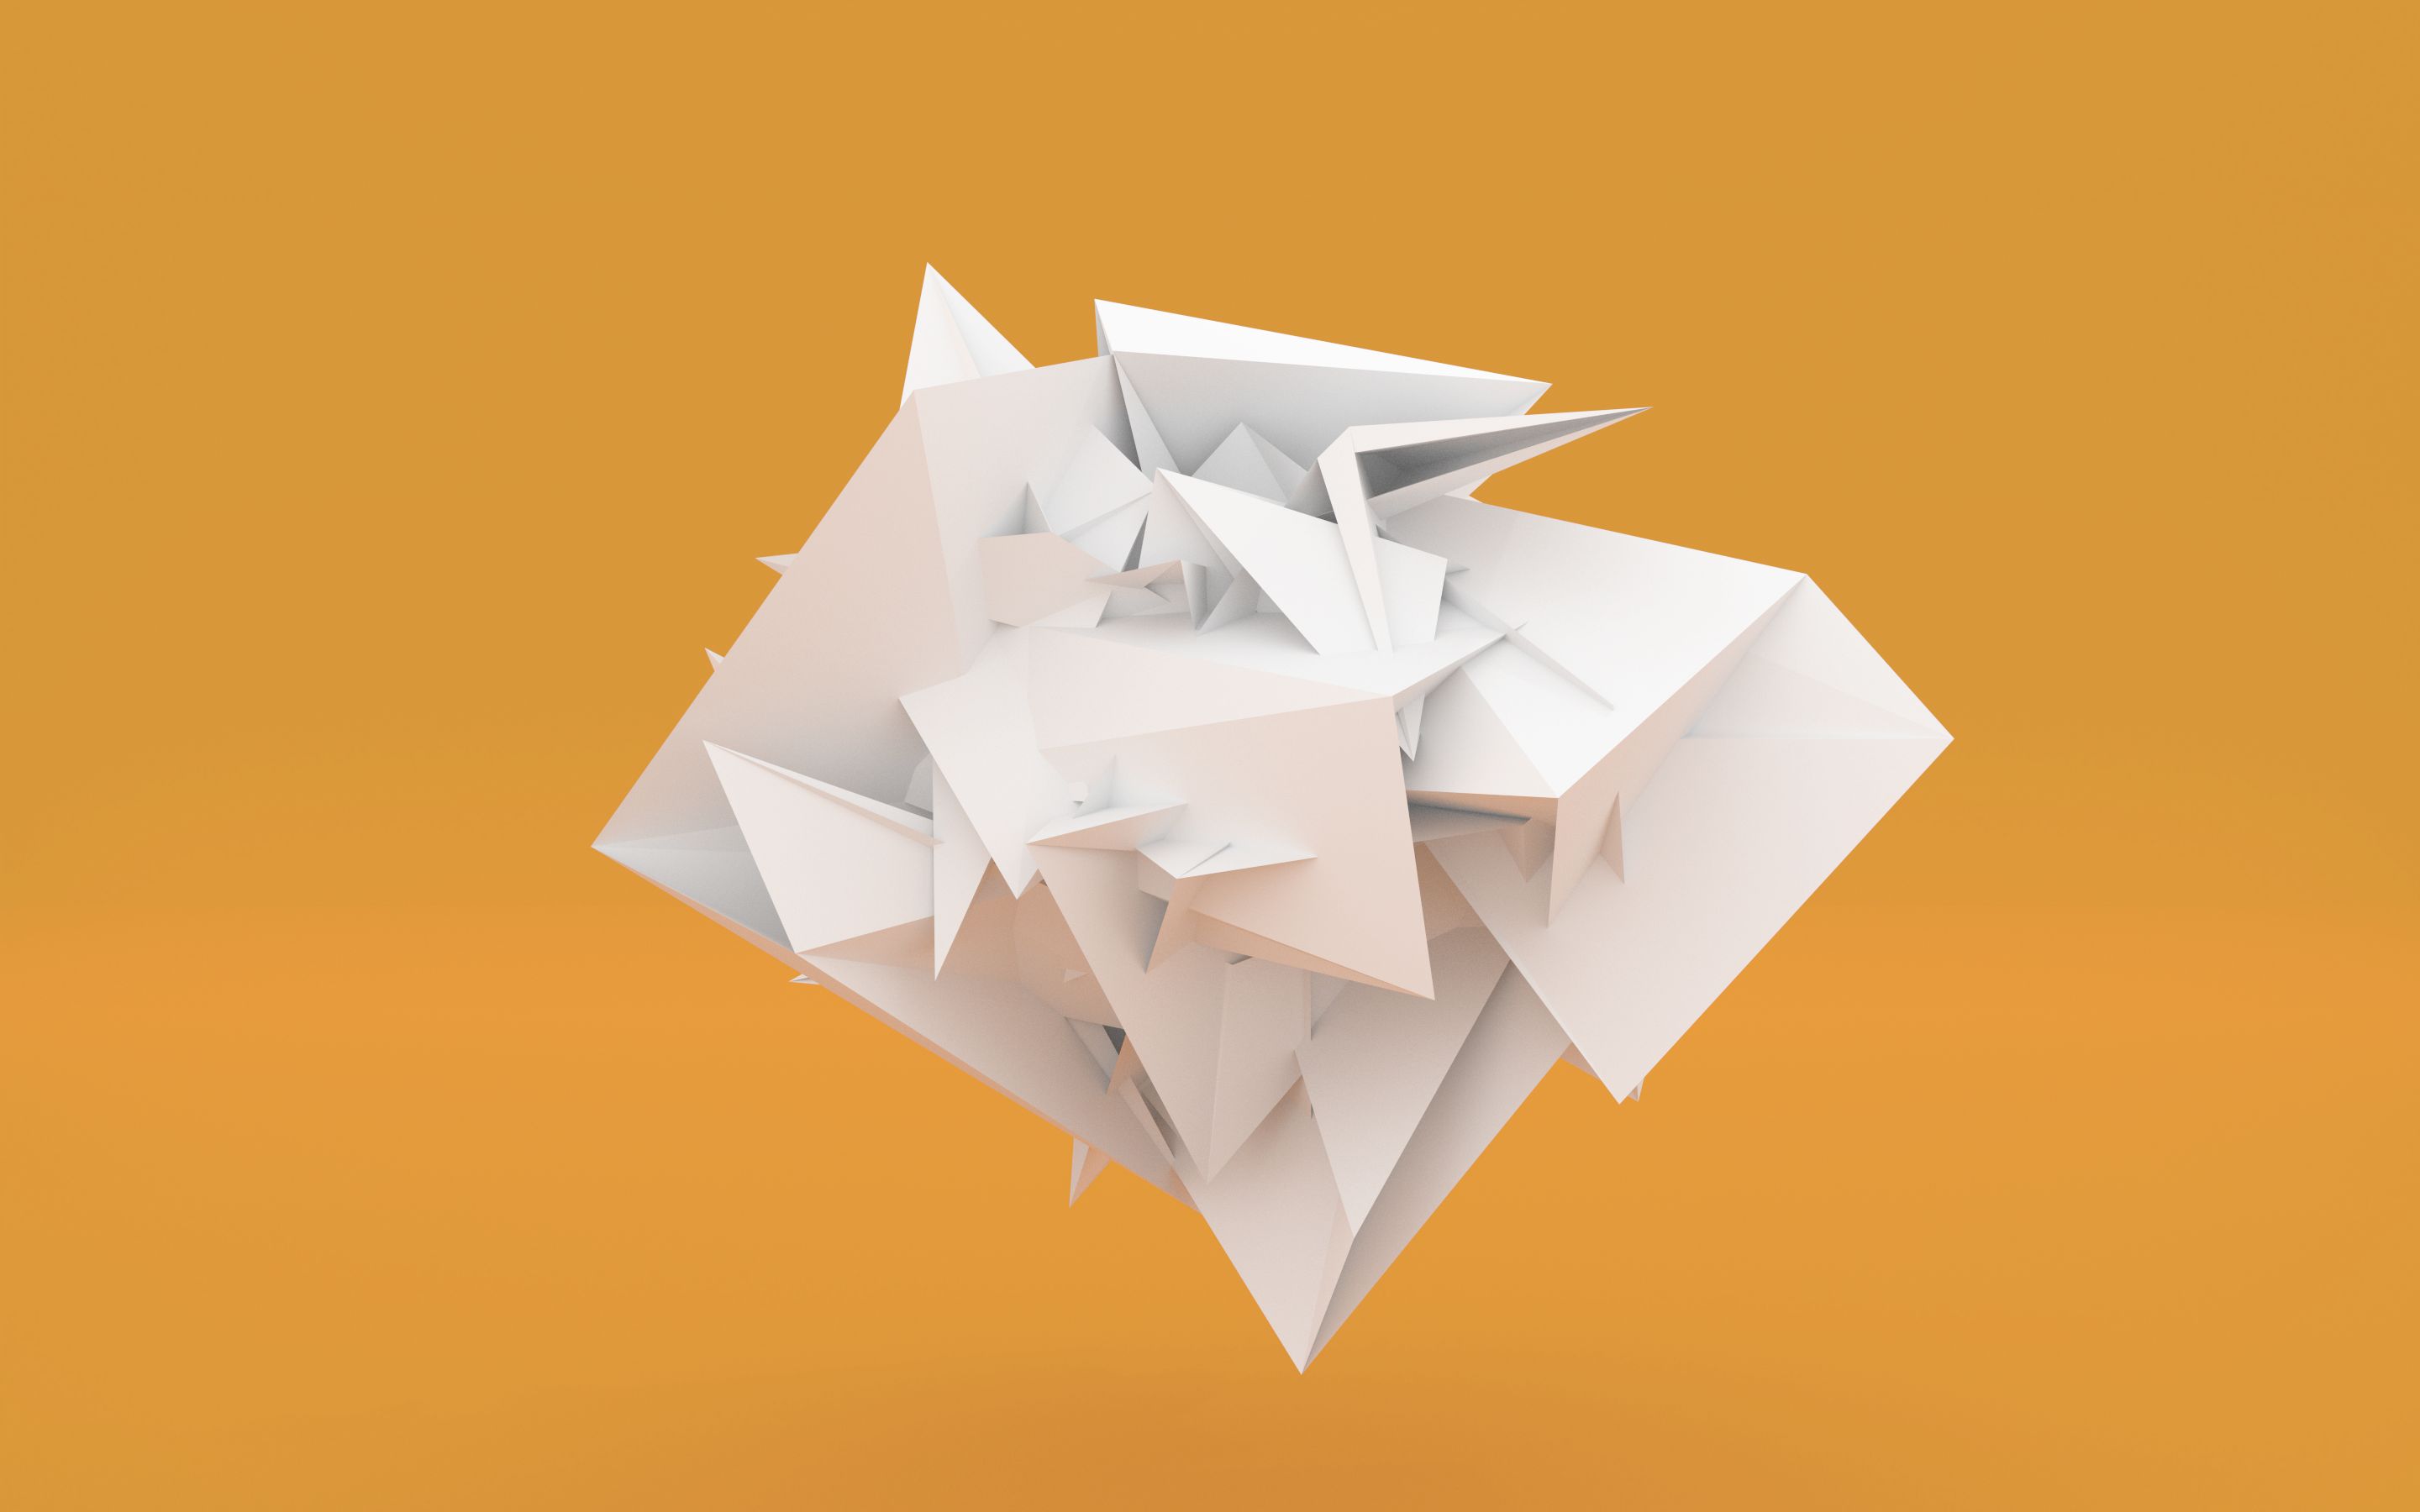 3d, abstract, cgi, facets, low poly, minimalist, orange (color), paper, white